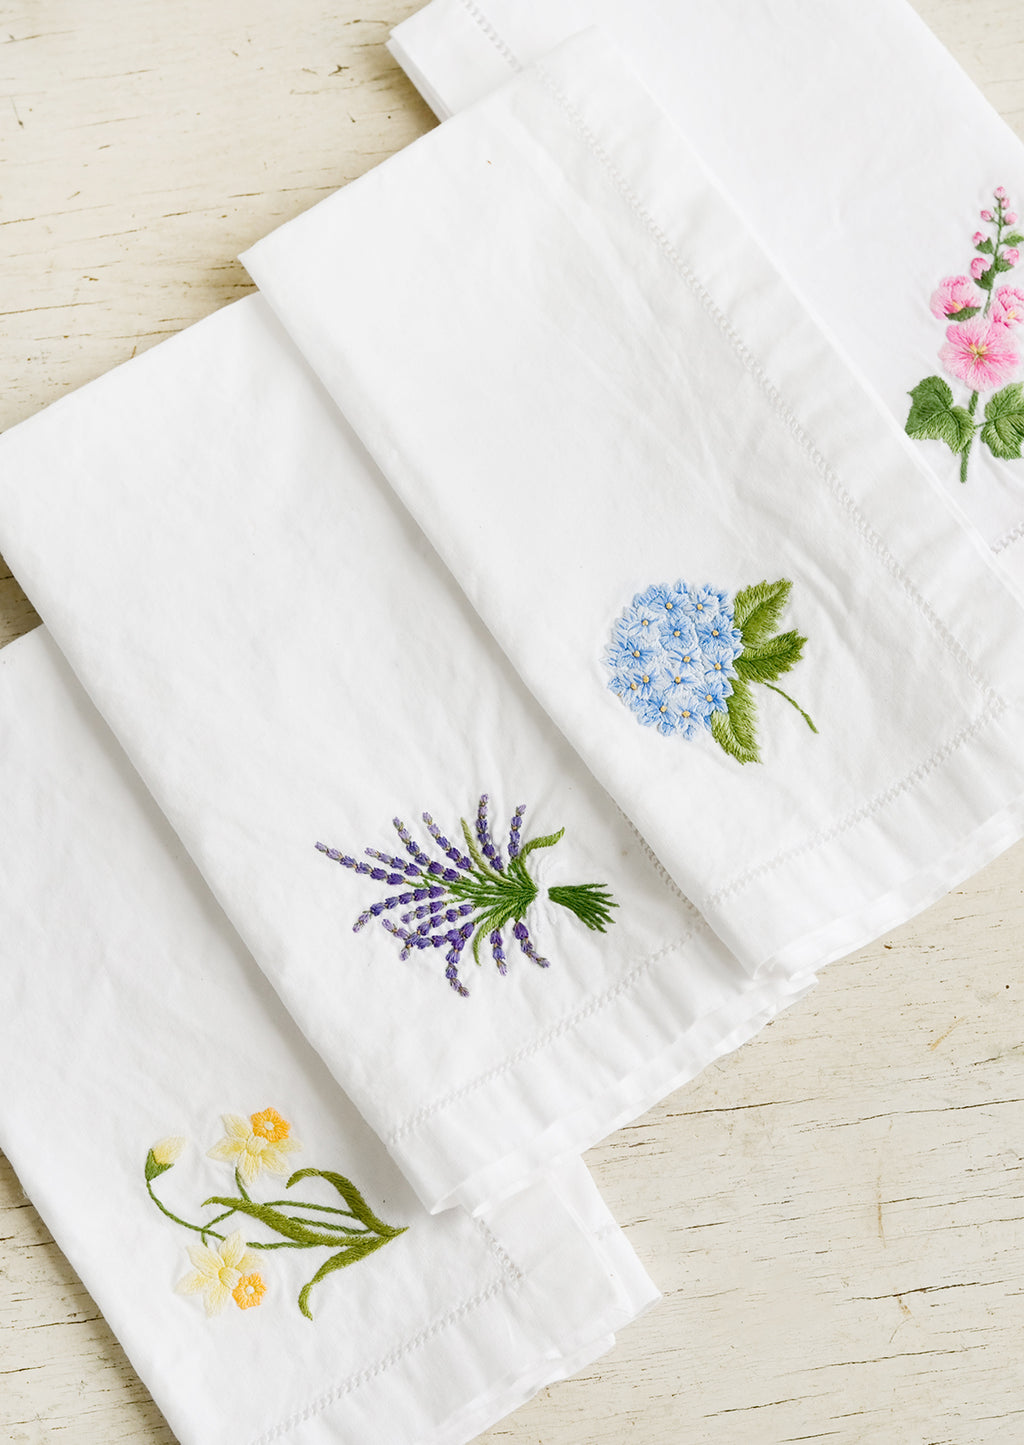 2: Four white cotton napkins with colorful botanical embroidery.